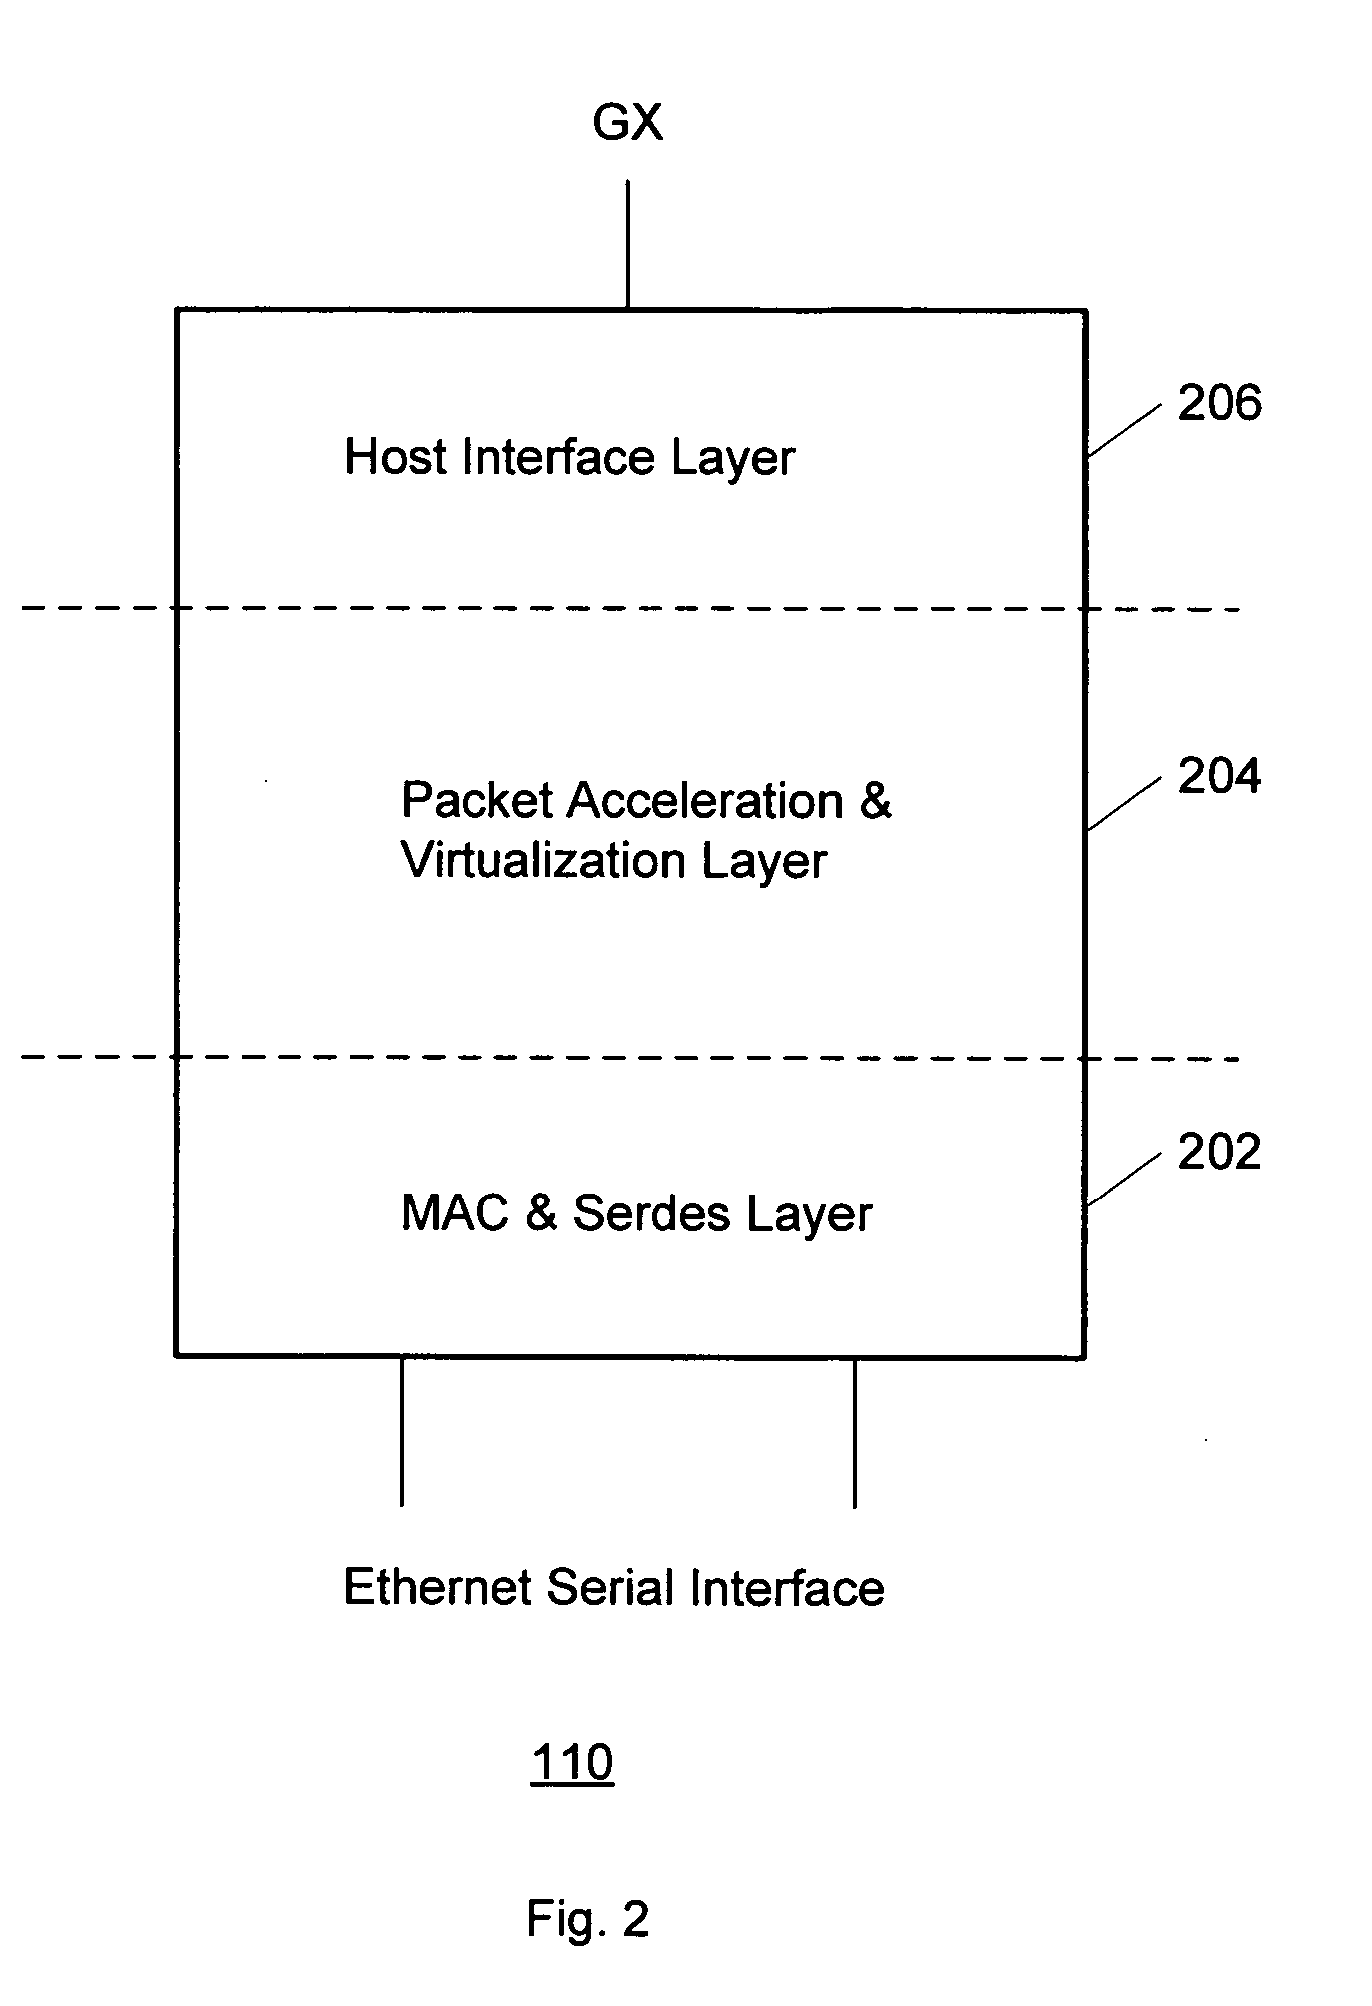 Configurable ports for a host Ethernet adapter